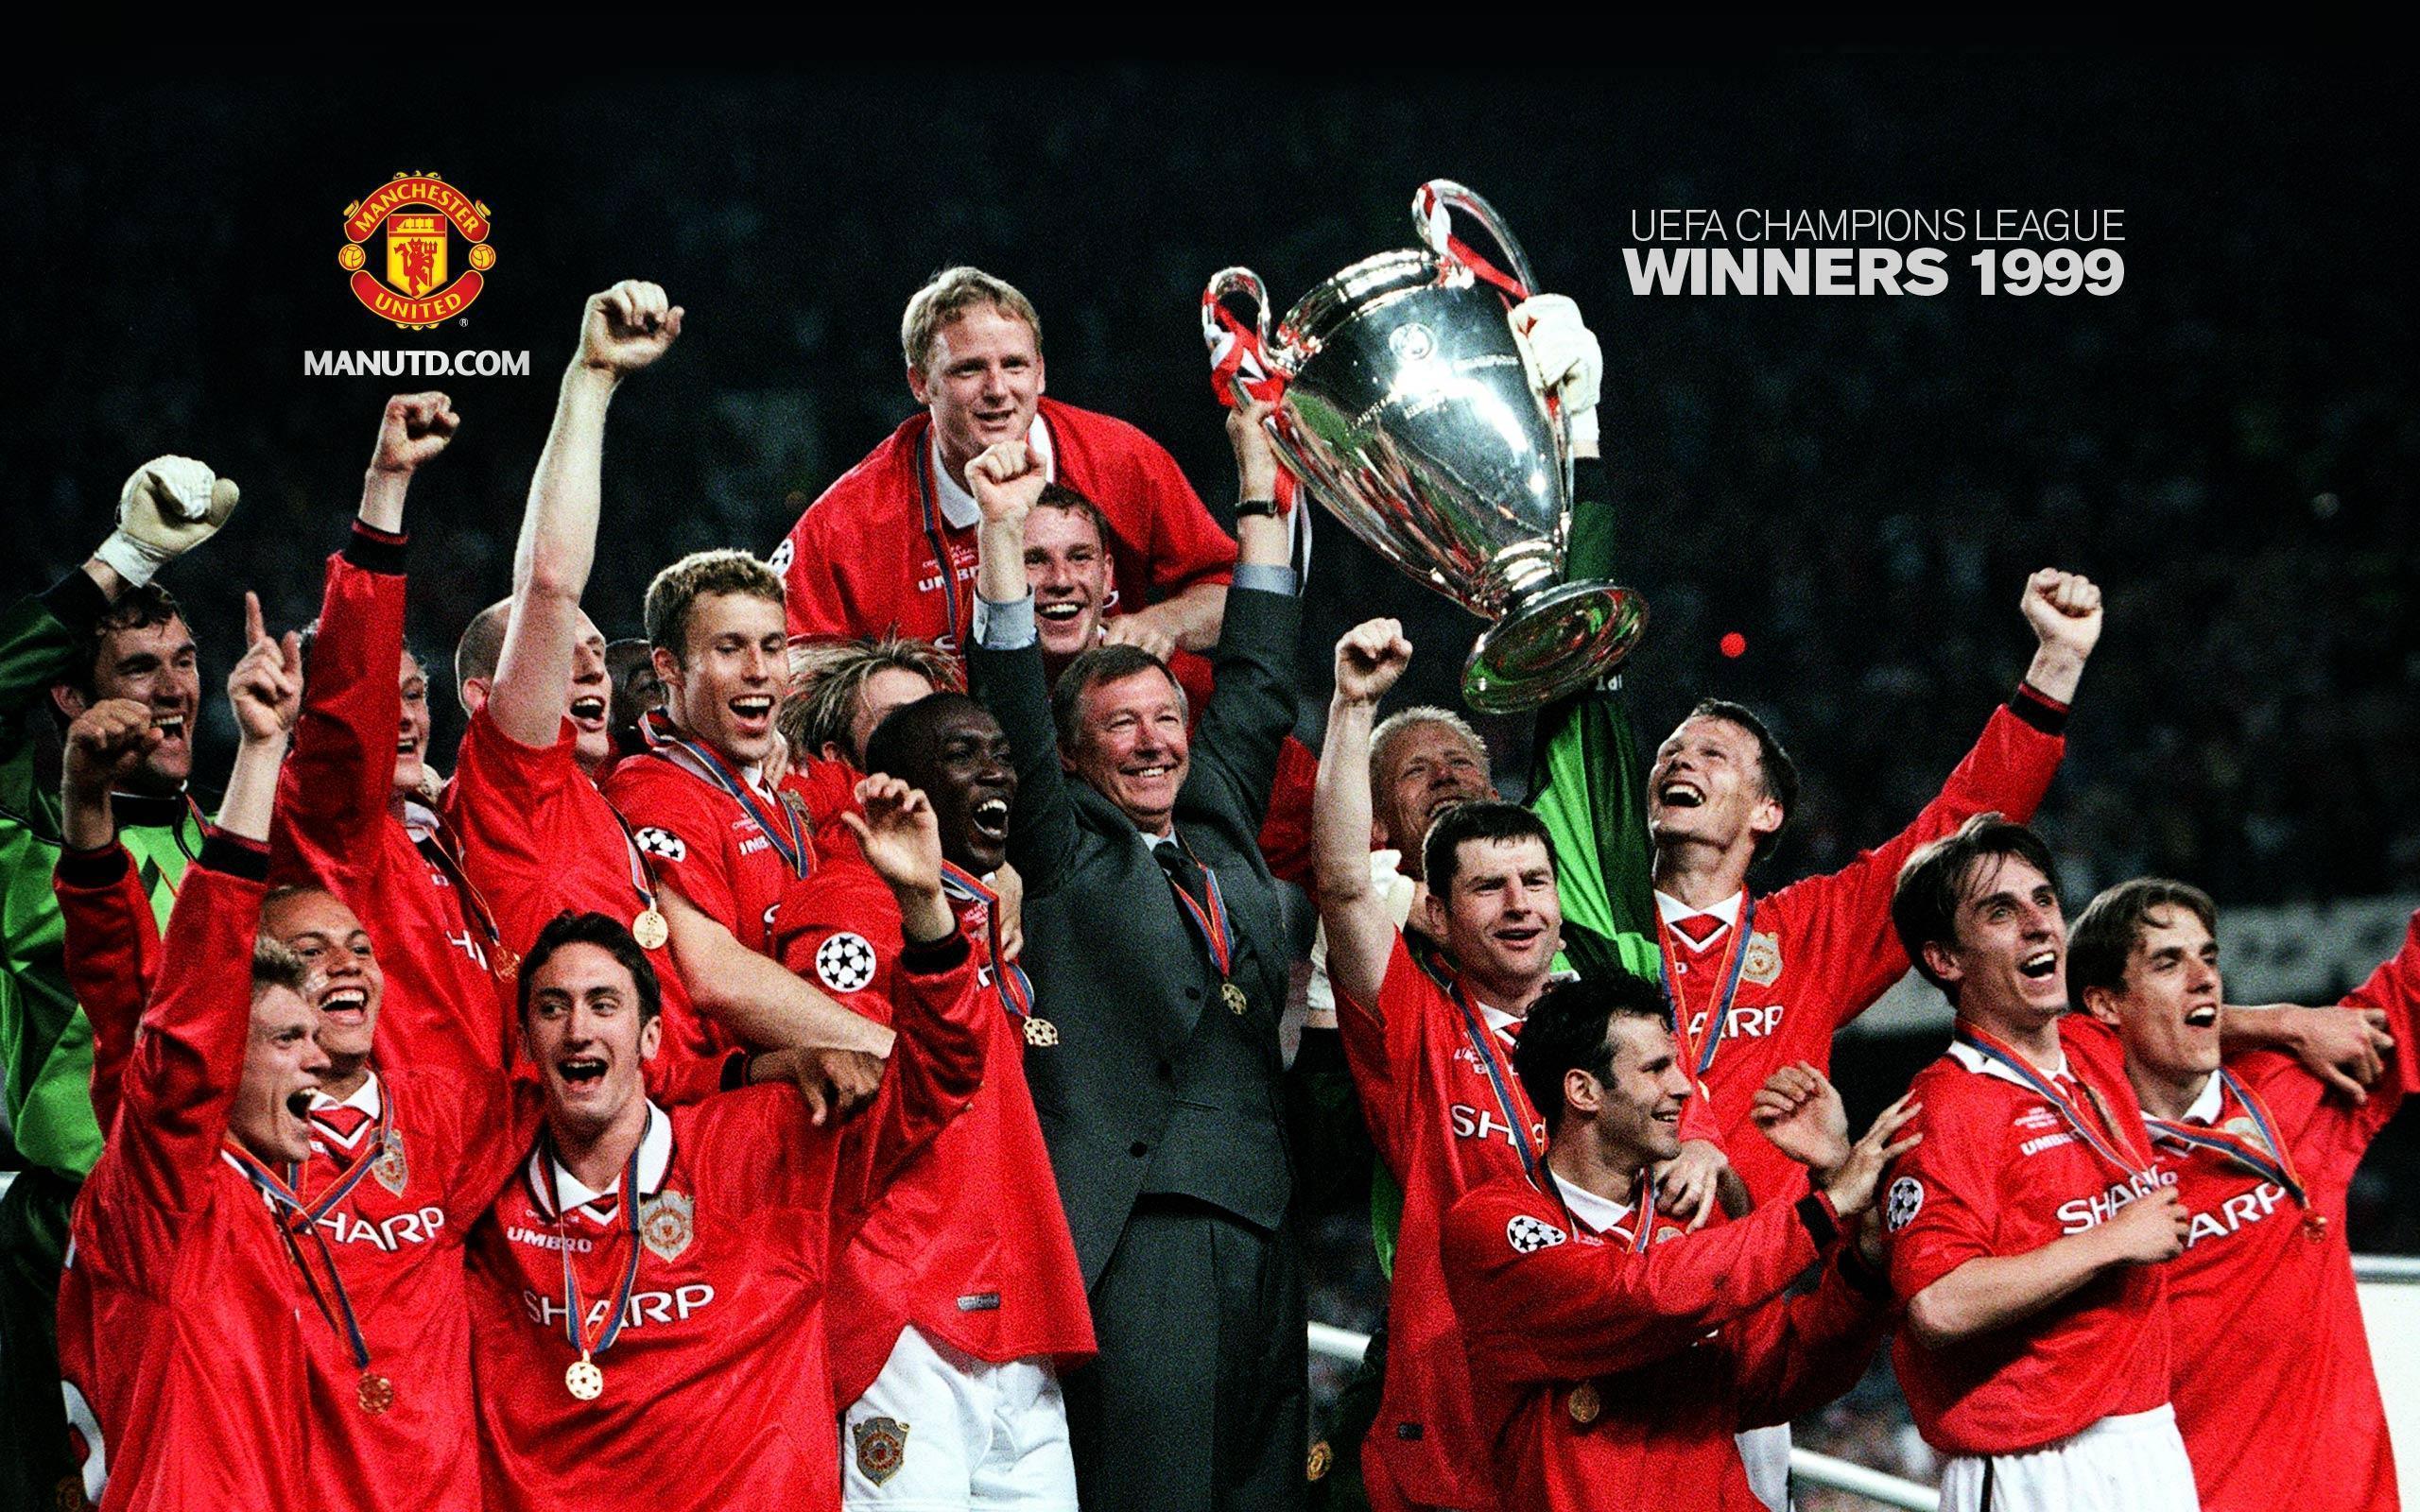 Champions League Winners Wallpapers - Wallpaper Cave